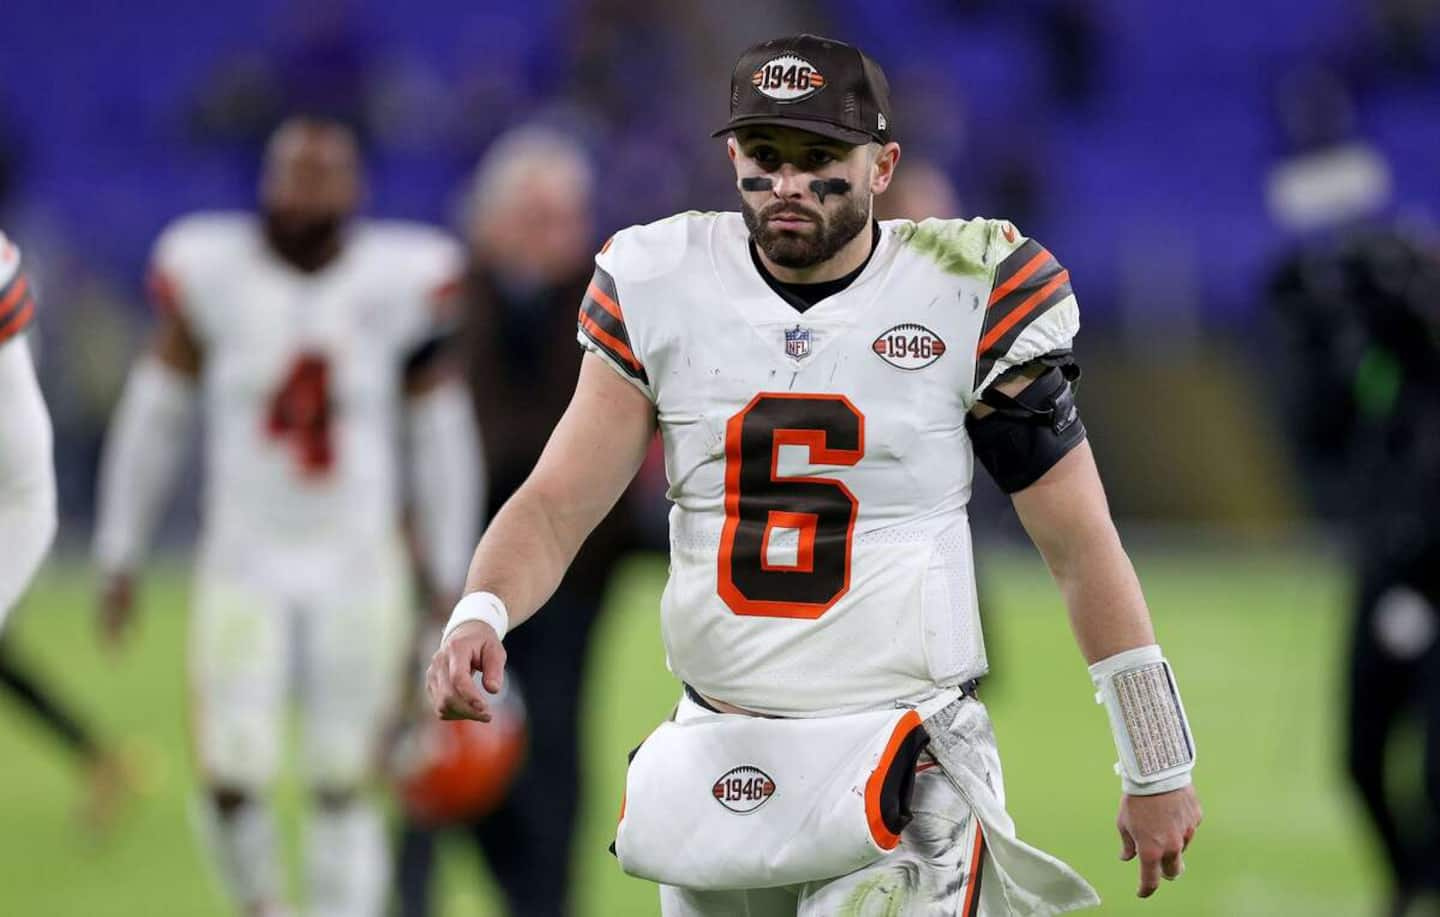 NFL: Baker Mayfield has circled a date on his calendar